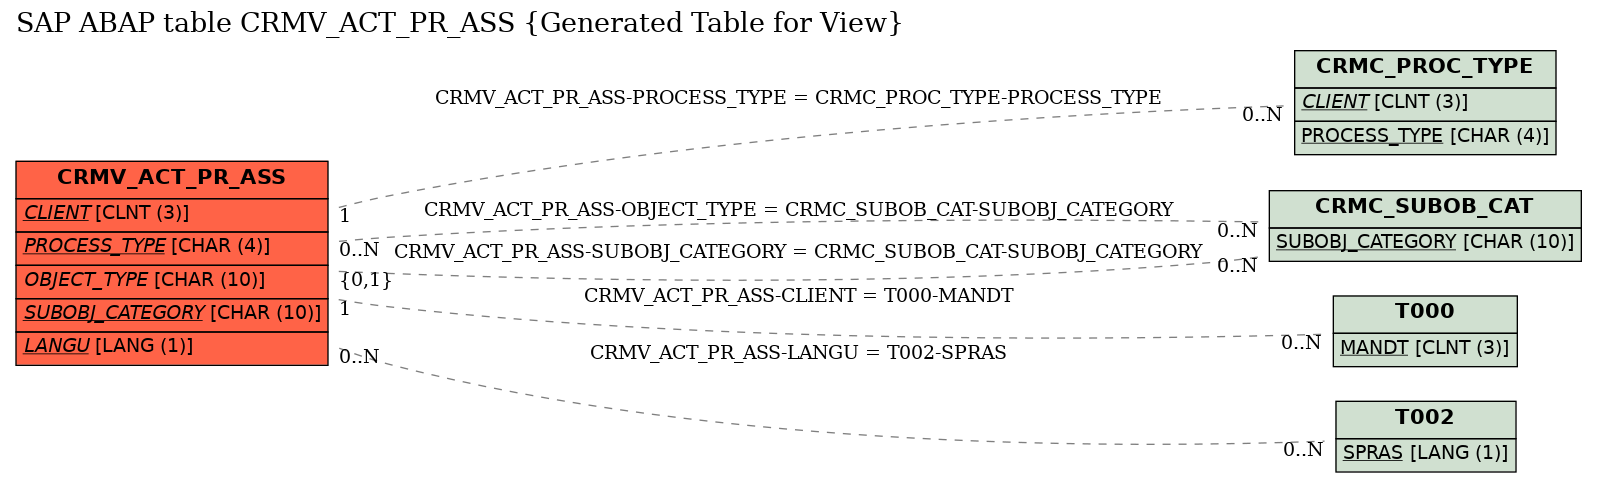 E-R Diagram for table CRMV_ACT_PR_ASS (Generated Table for View)